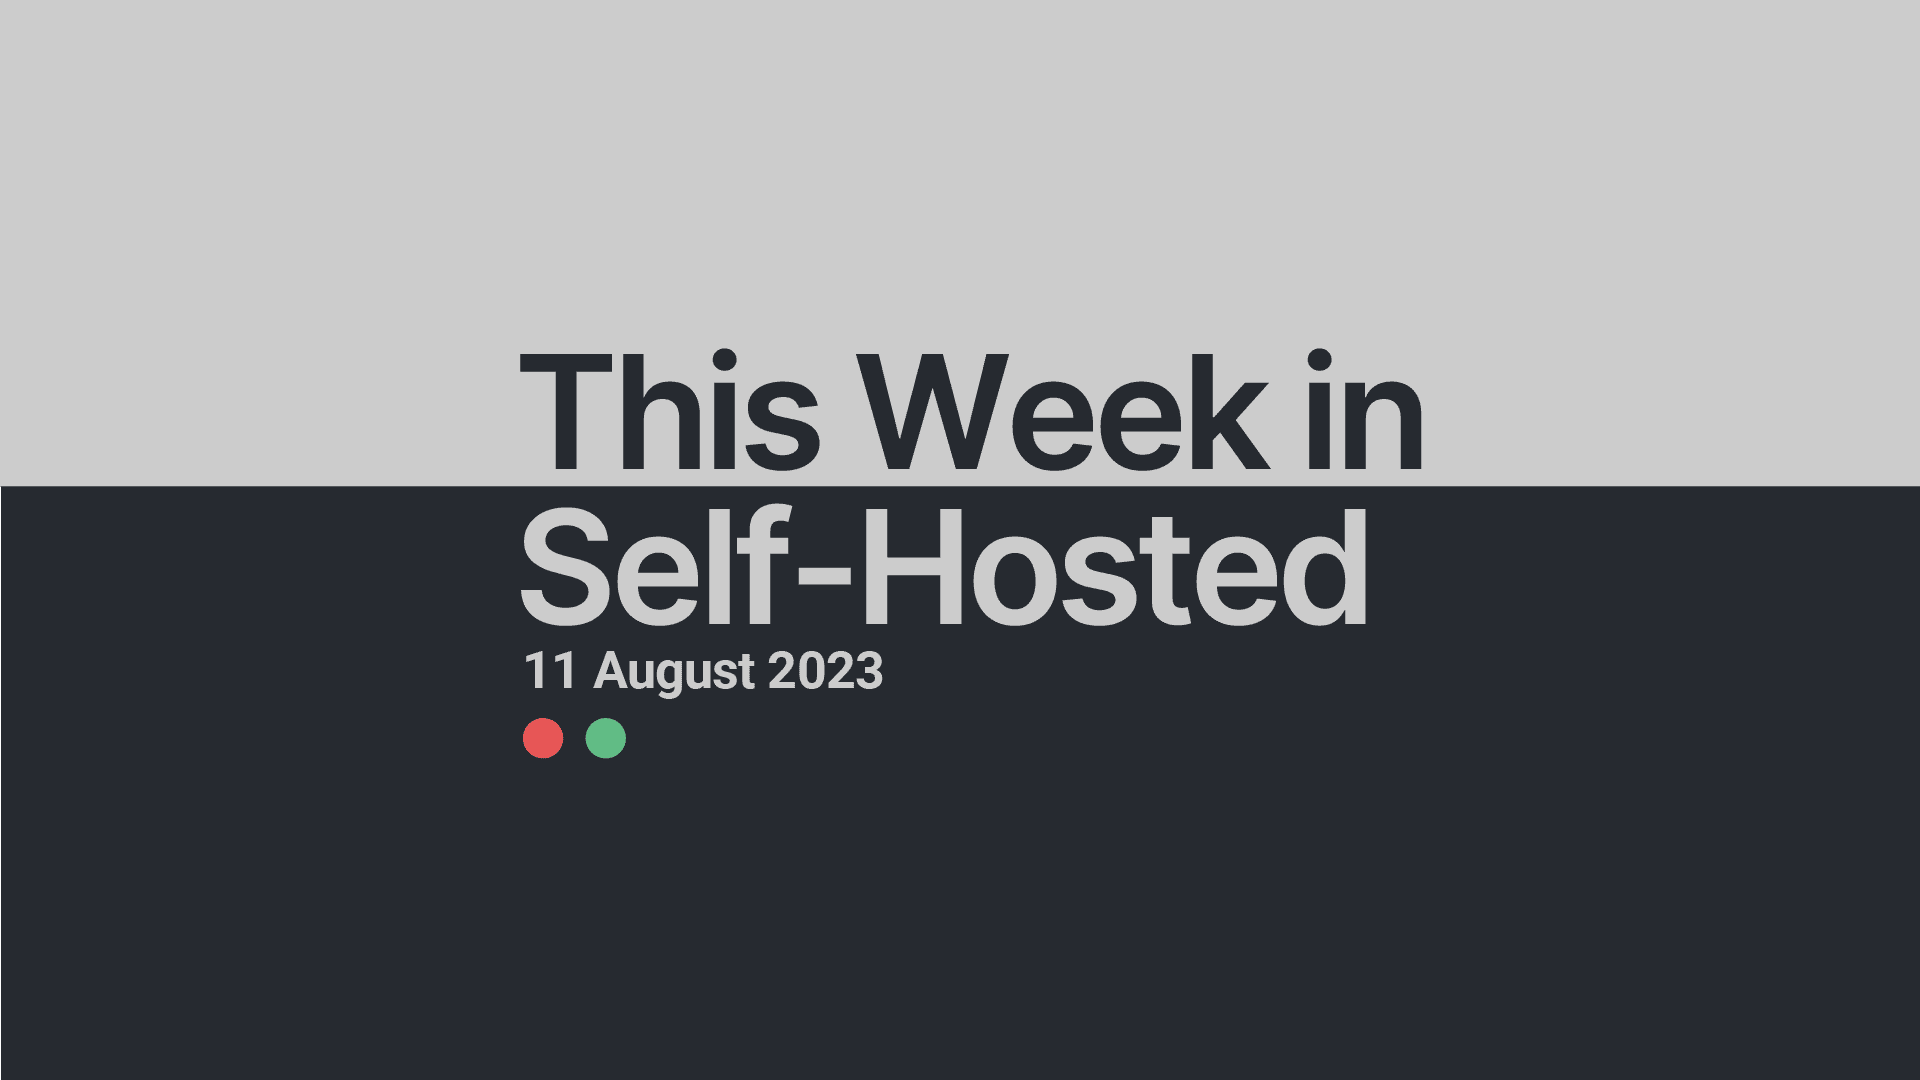 This Week in Self-Hosted (11 August 2023) Post image